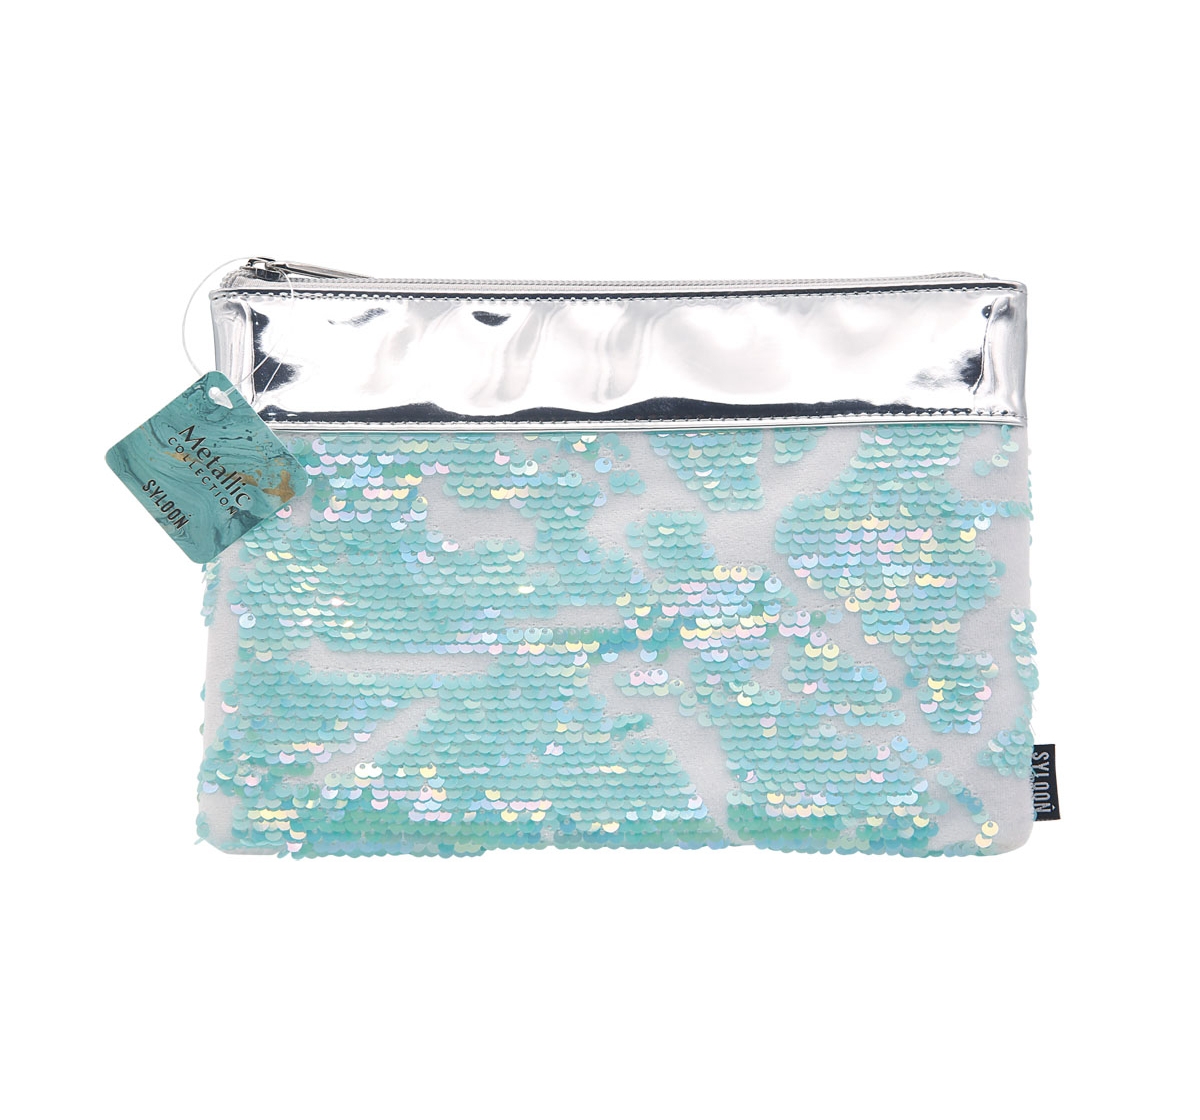 Syloon | Syloon Metallic - Silver Blue Sequin Pencil Pouch   Pencil Pouches & Boxes for Kids age 5Y+ 